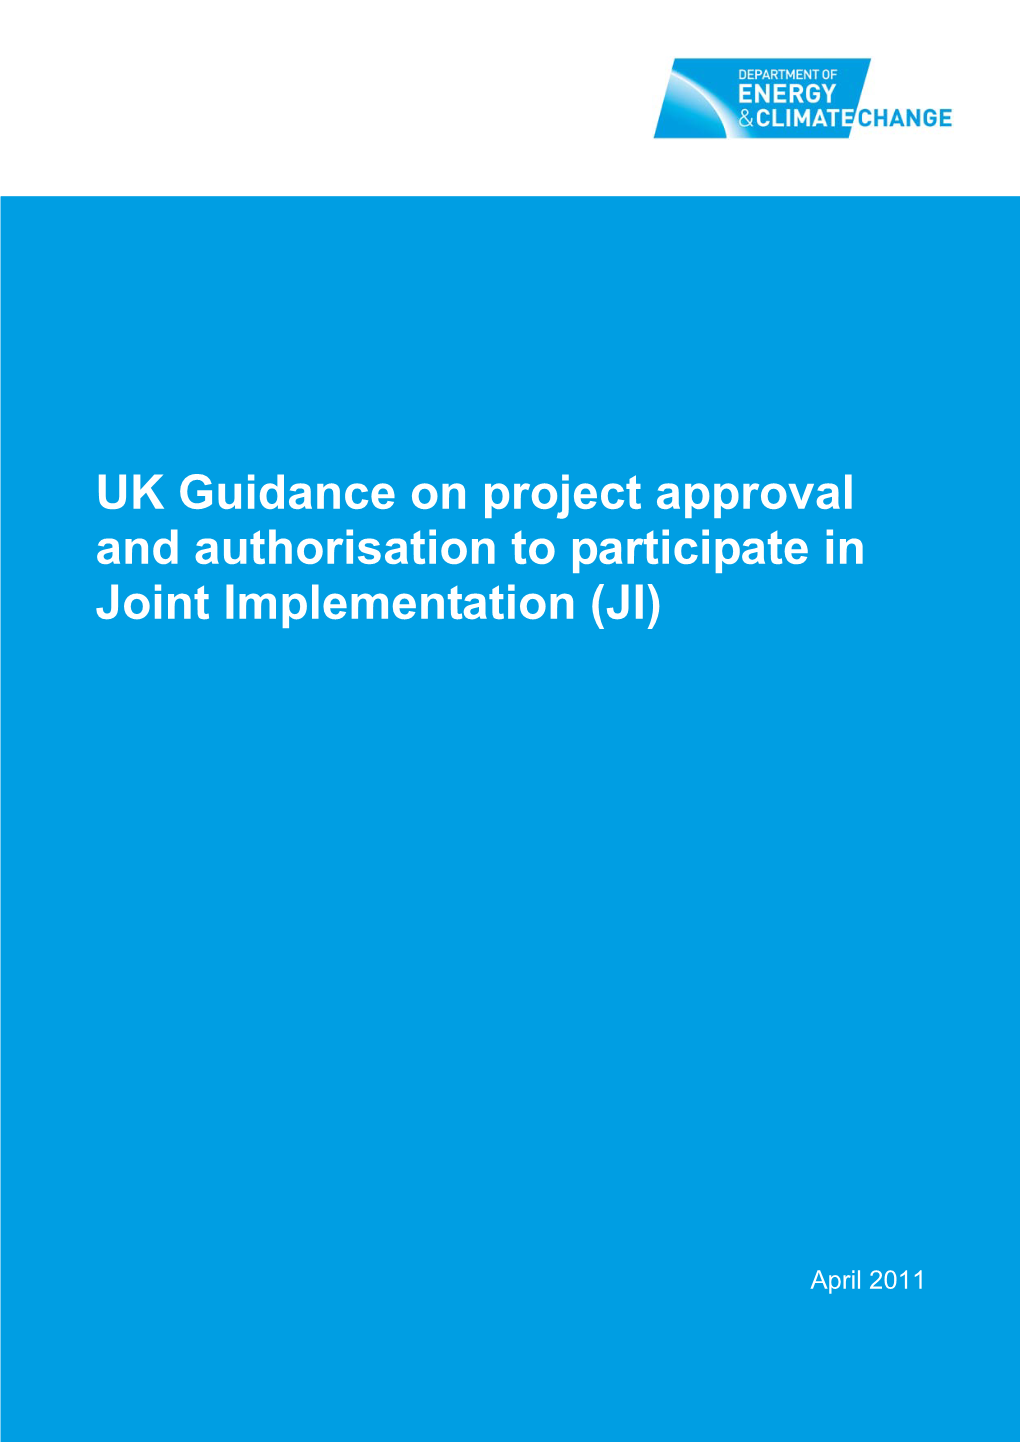 UK Guidance on Project Approval and Authorisation to Participate in Joint Implementation (JI)